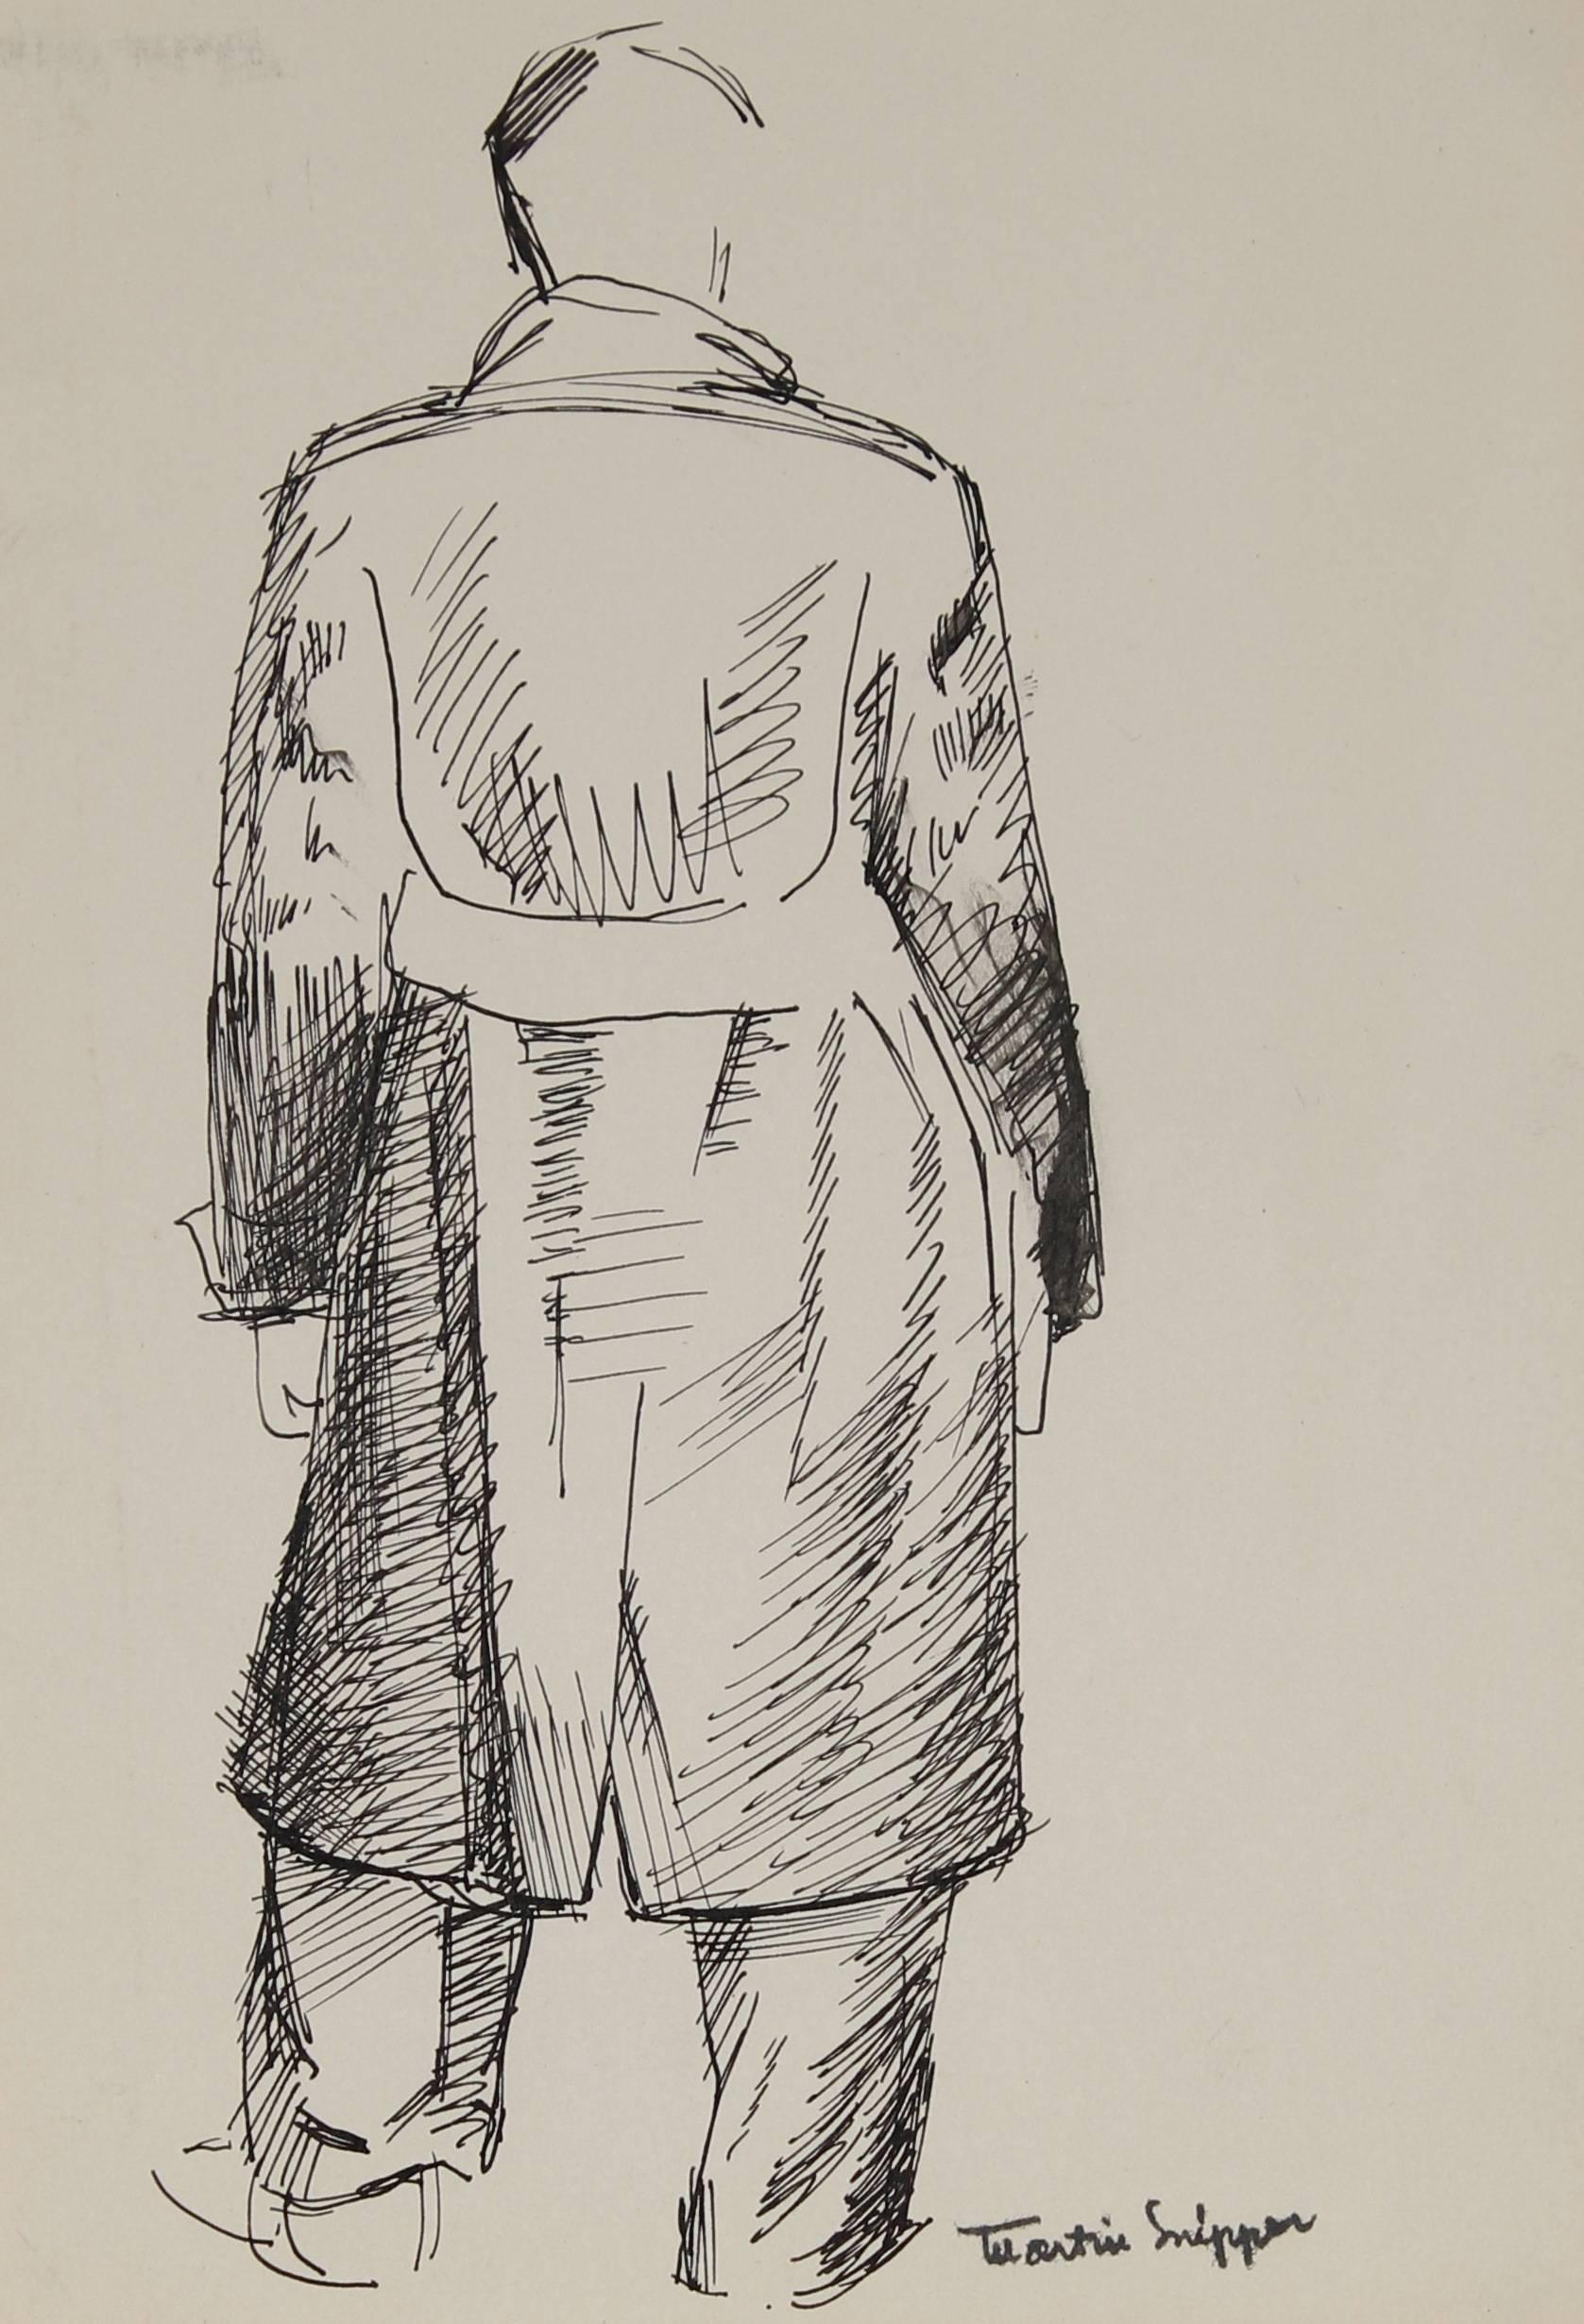 Man in Trench Coat, Ink on Paper Sketch, 20th Century - Art by Martin Snipper